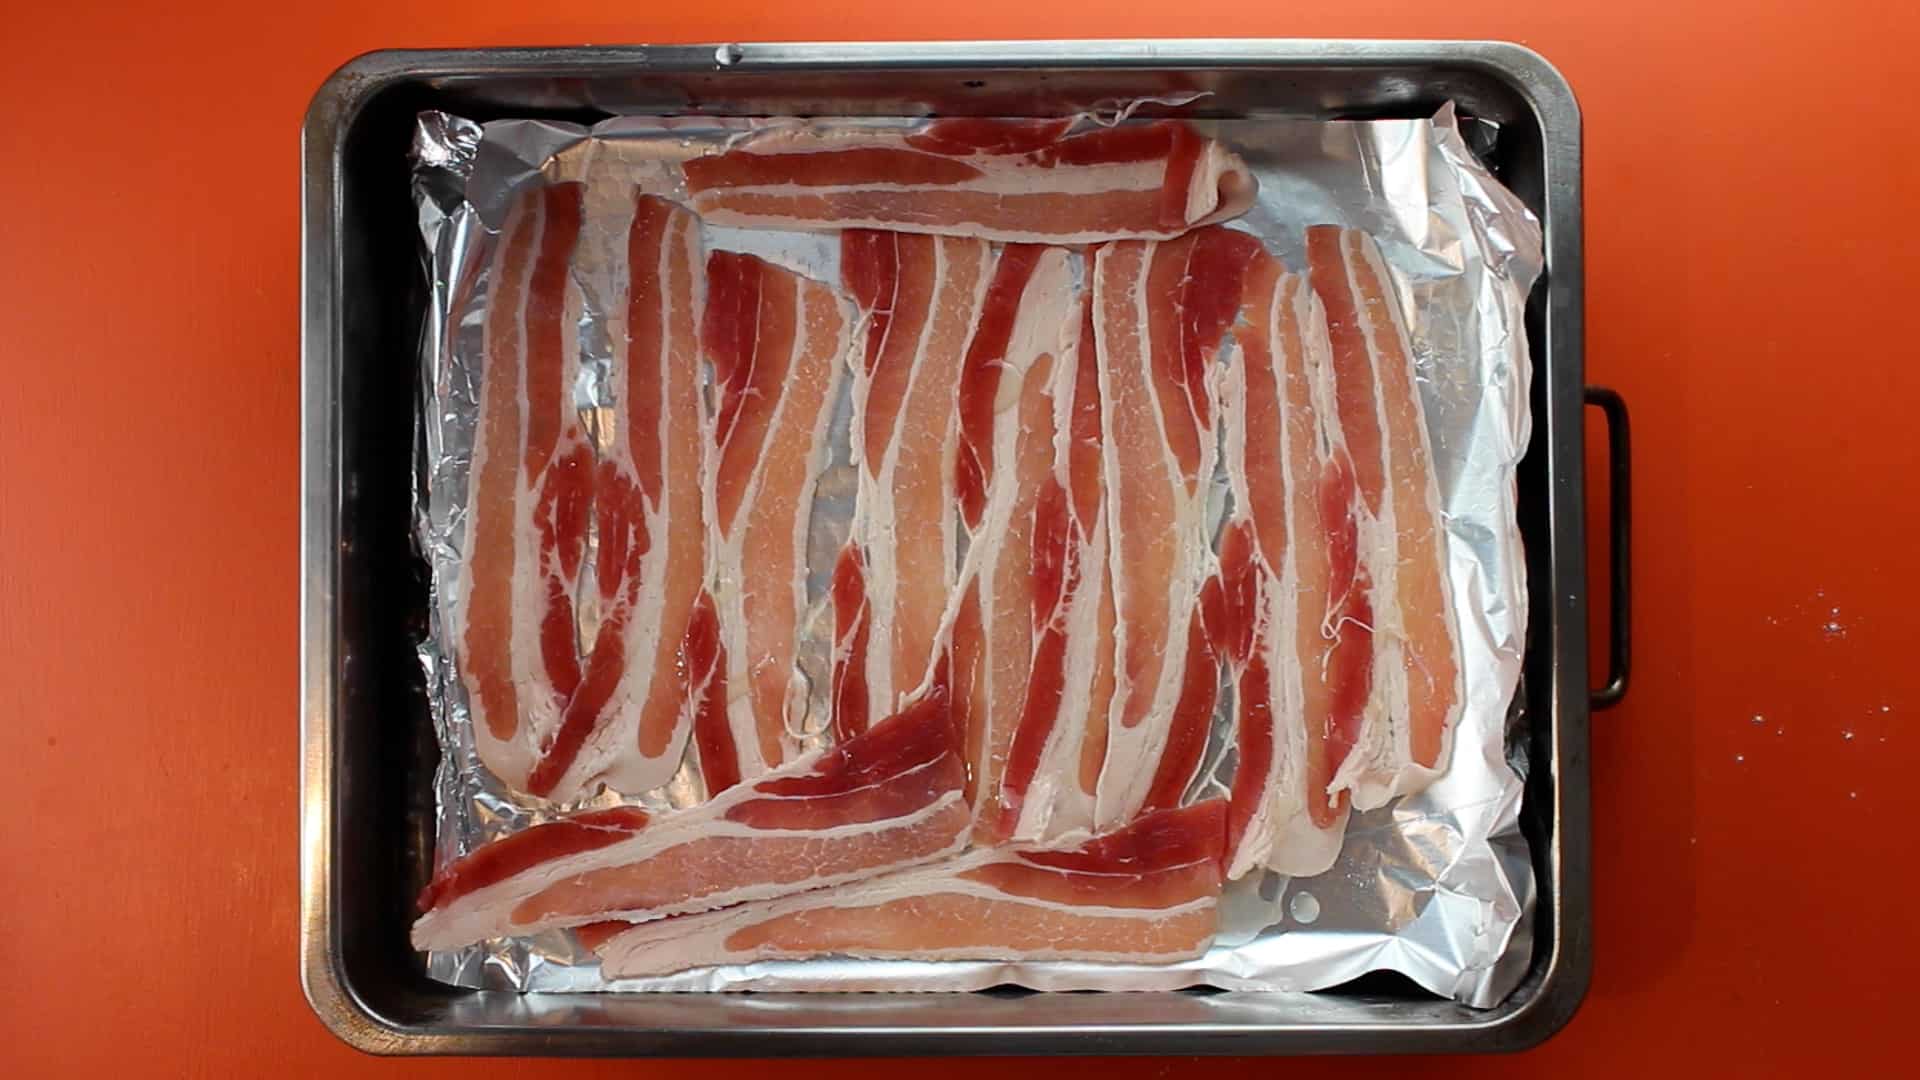 Rashers of bacon on a foil lined baking tray on an orange background.